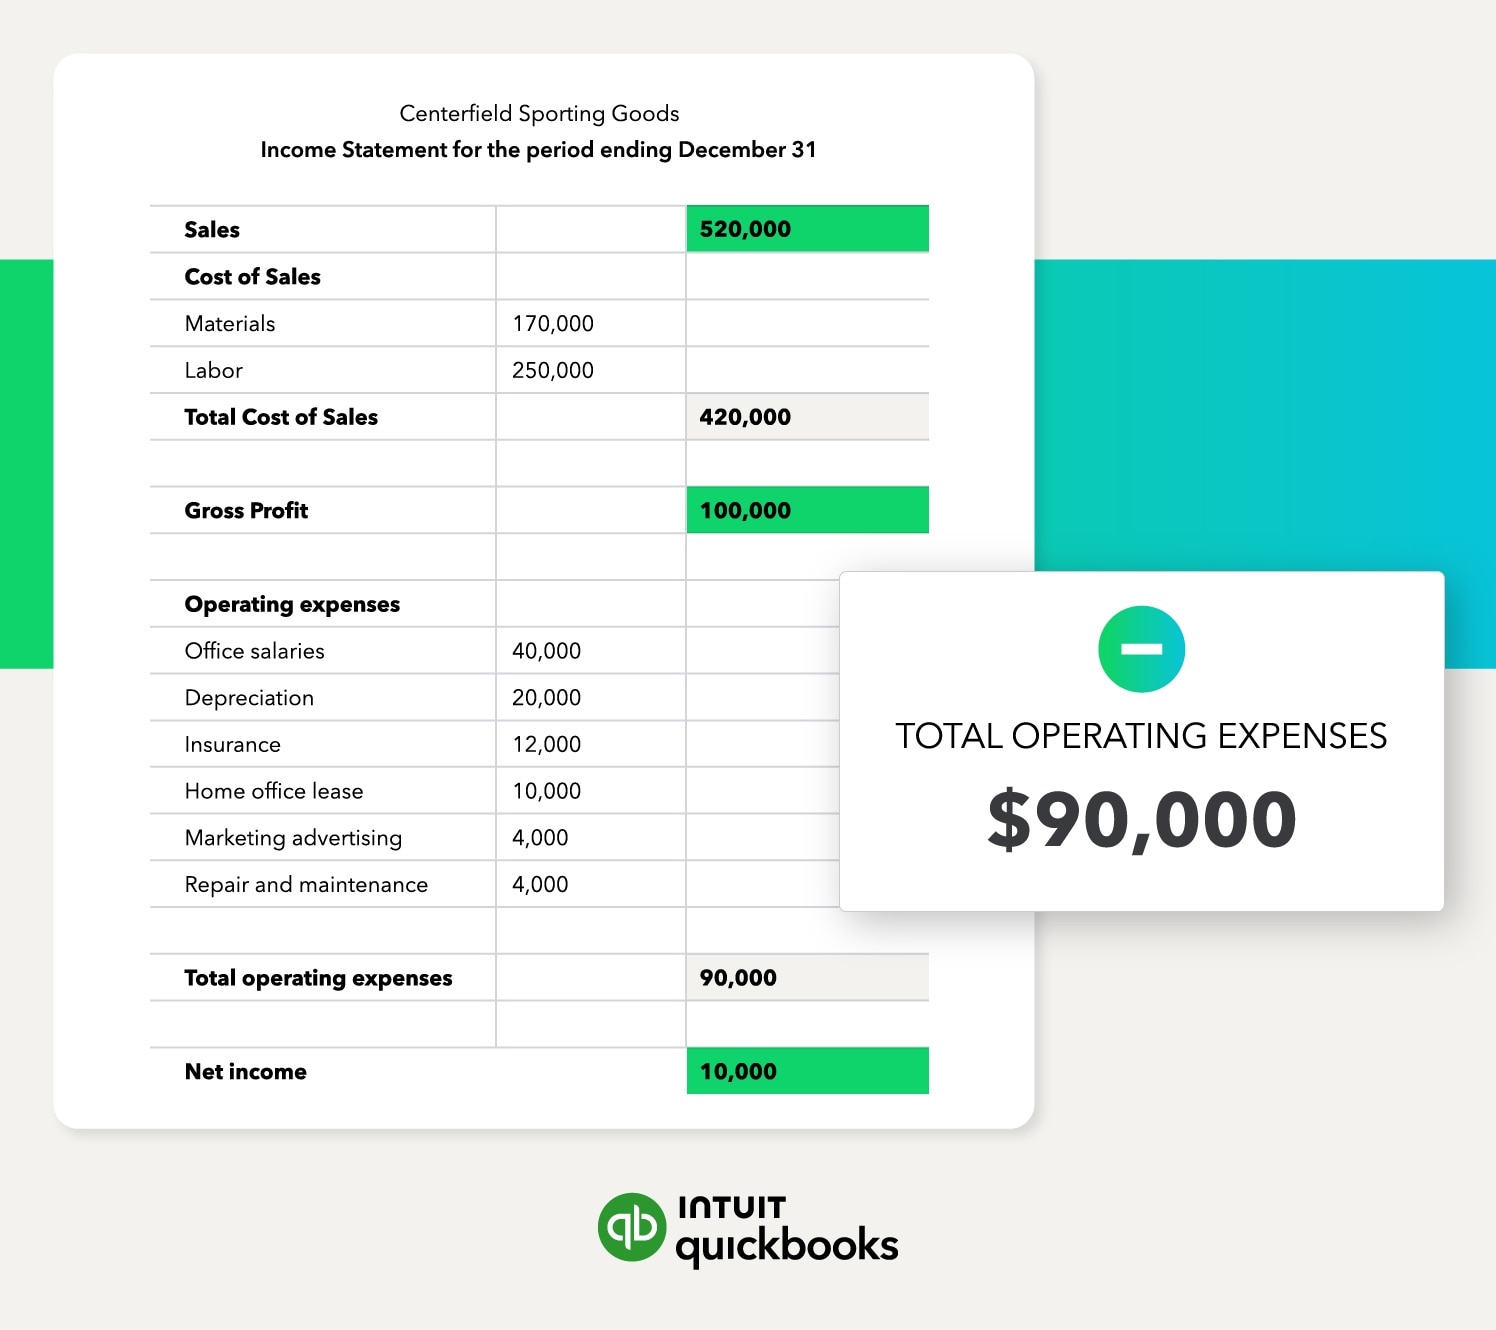 An example of an income statement.